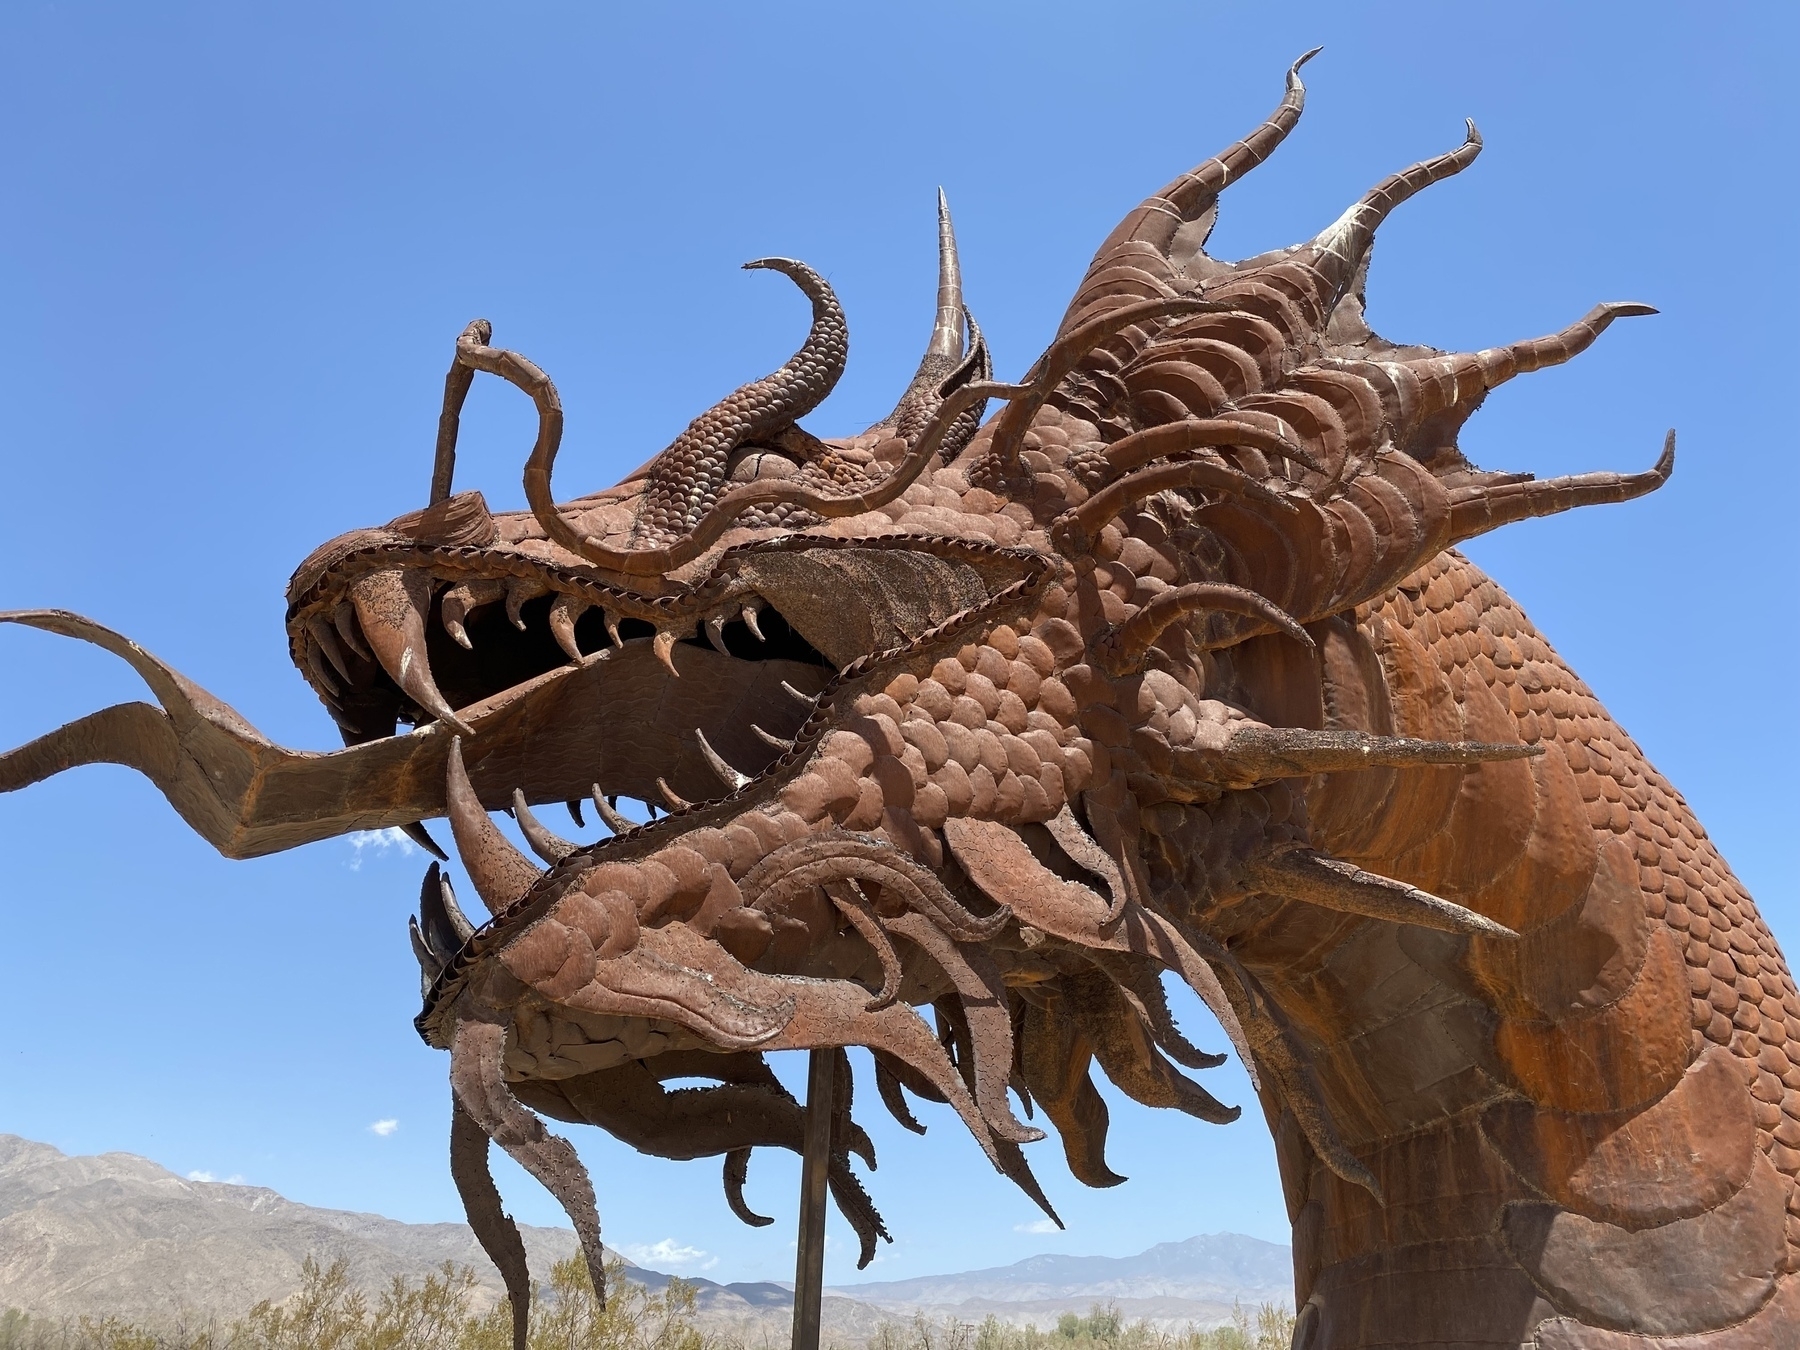 Head of a metal sculpture of a dragon against a blue sky.